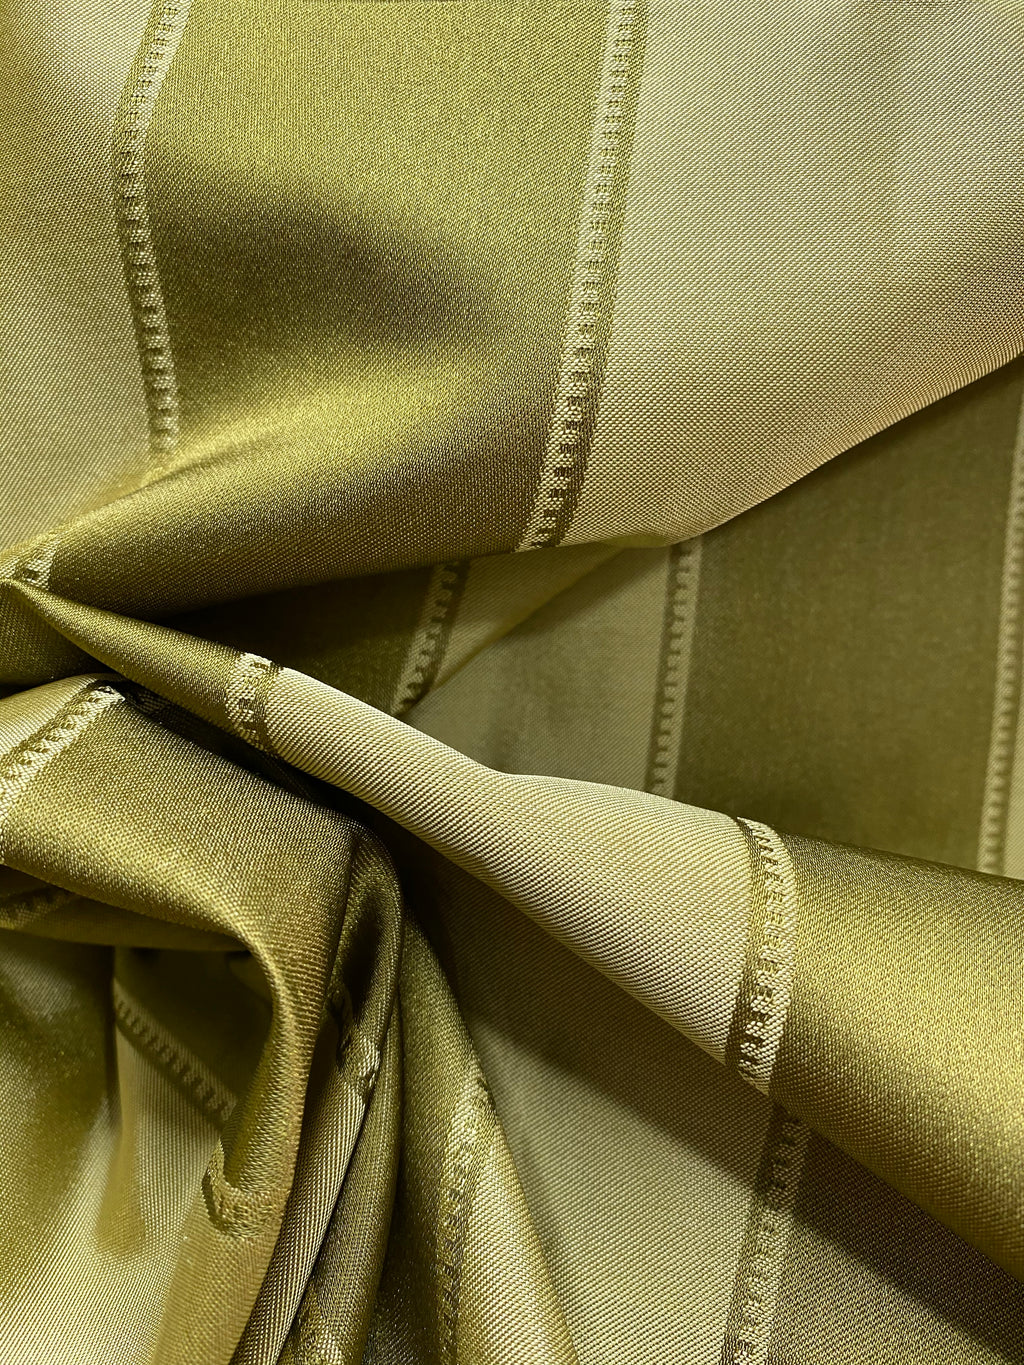 New! Olive and Gold Satin Stripes Fabric - Fancy Styles Fabric Pierre Frey Lee Jofa Brunschwig & Fils